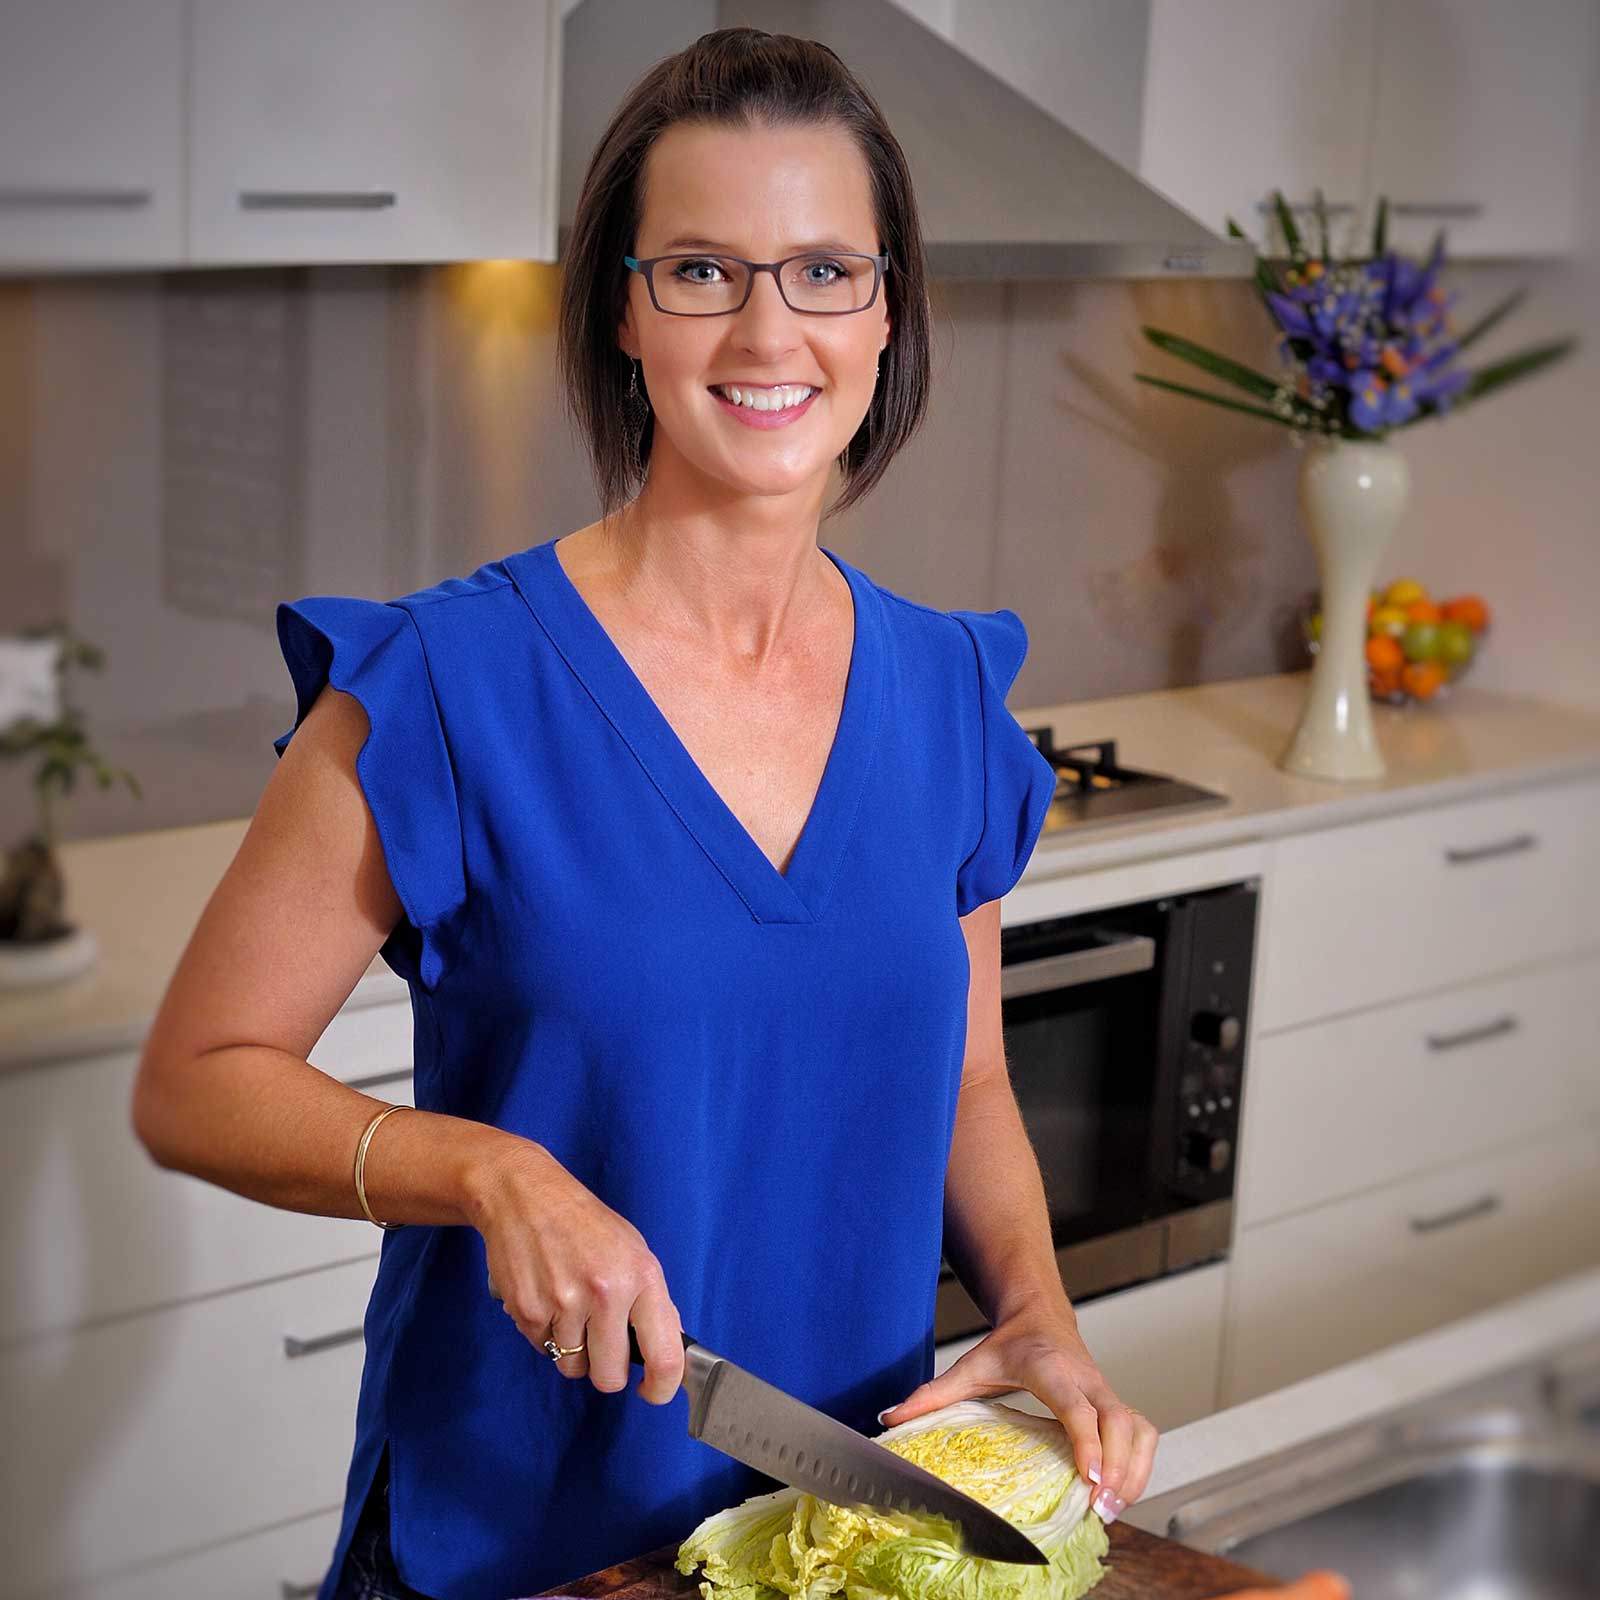 Allyson Browne is photographed in a kitchen slicing a cabbage. She wears a bright blue sleeveless shirt and reading glasses.